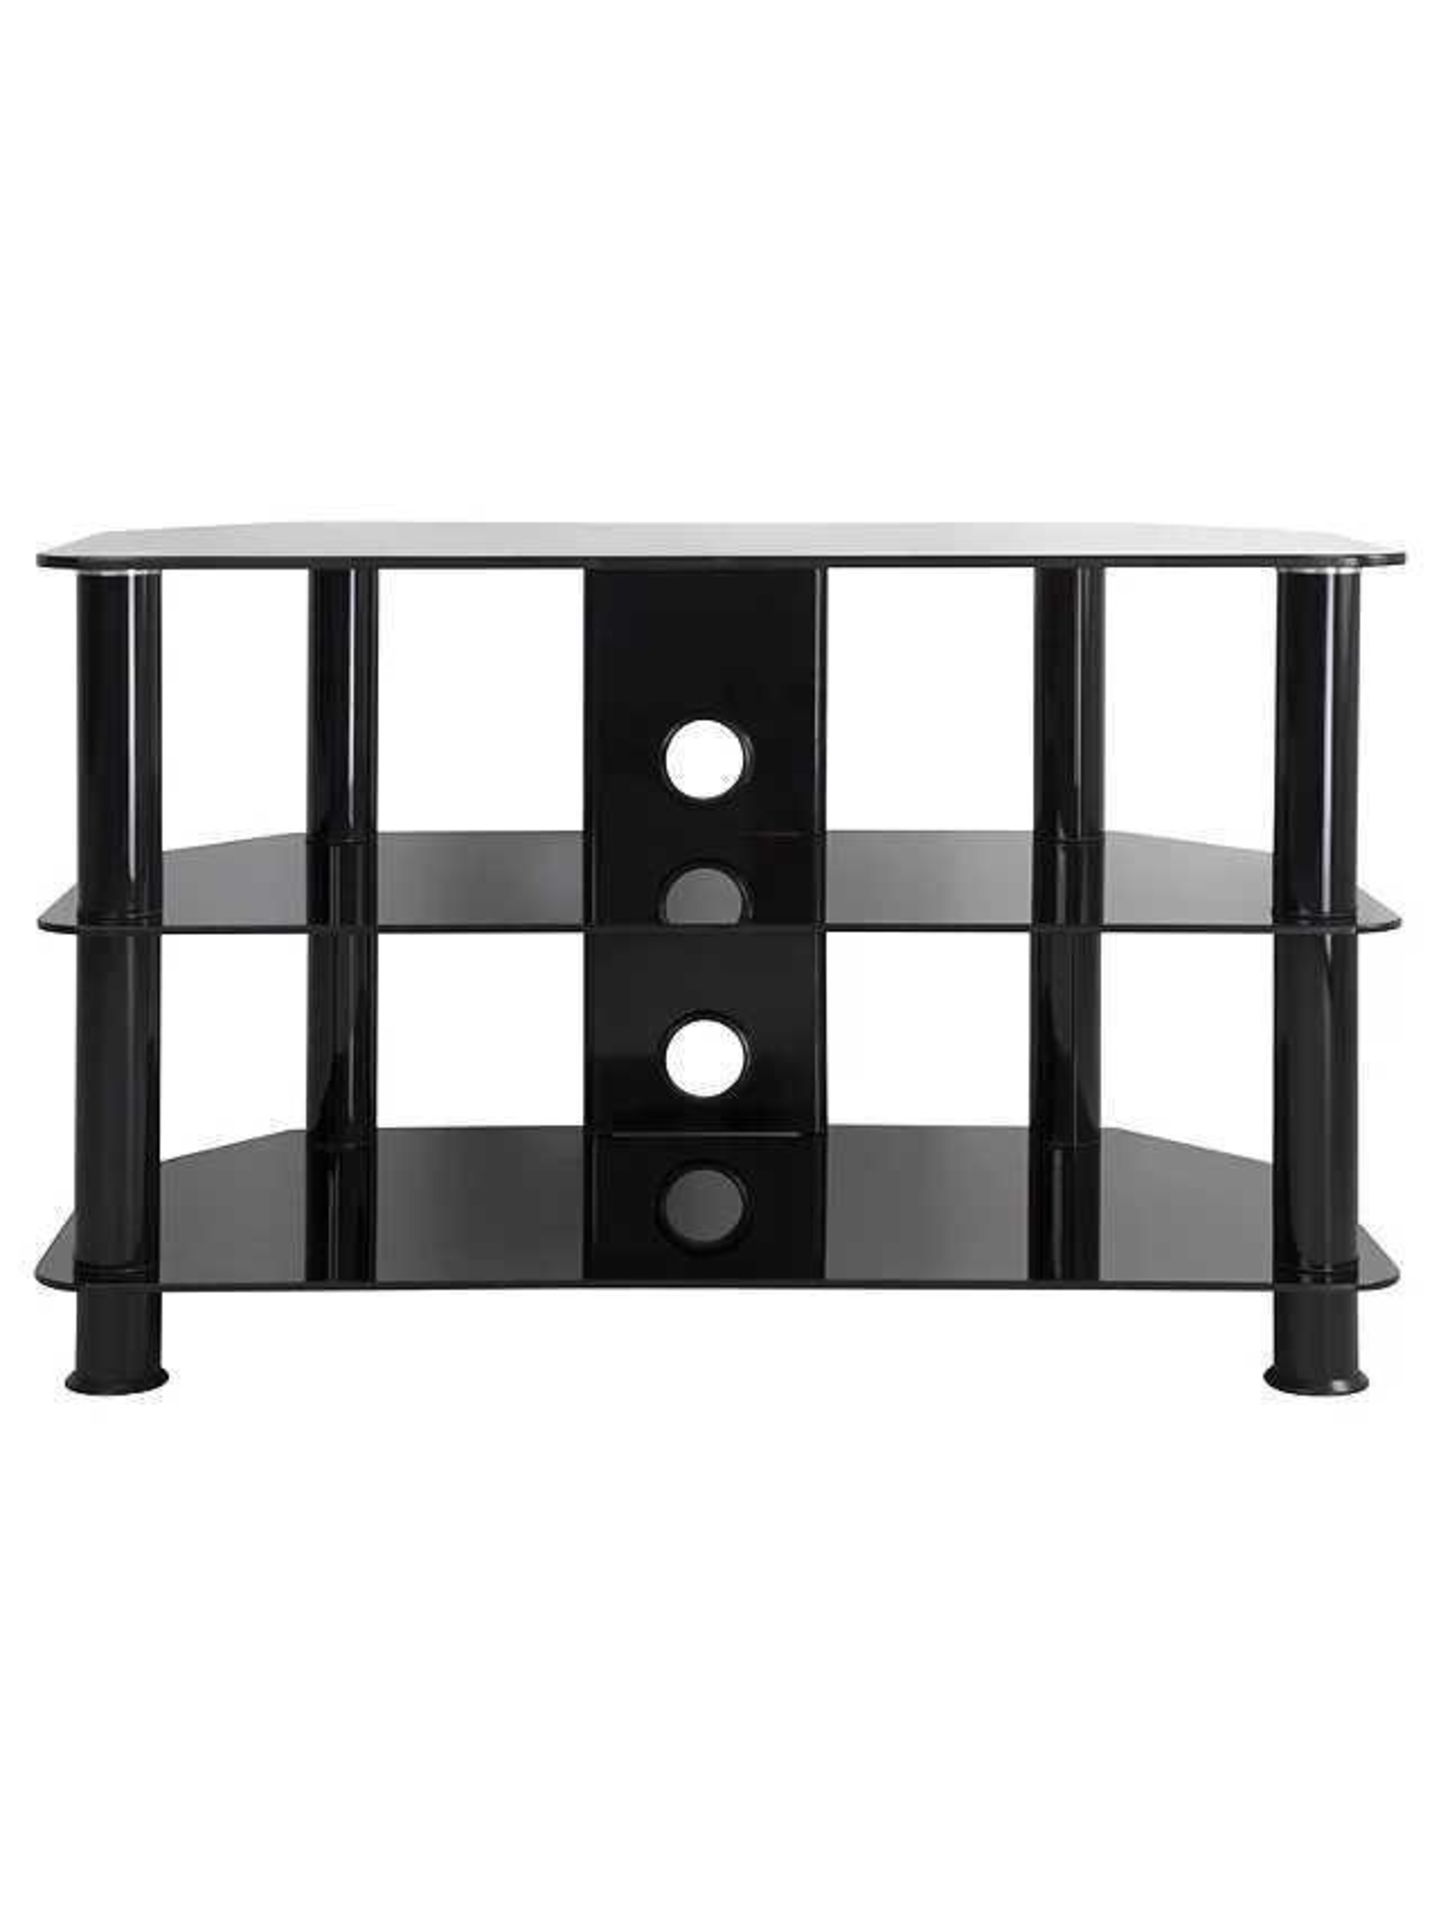 (Sp) RRP £100 Lot To Contain 1 John Lewis & Partners Gp800 Tv Stand For TVs Up To 40", Black